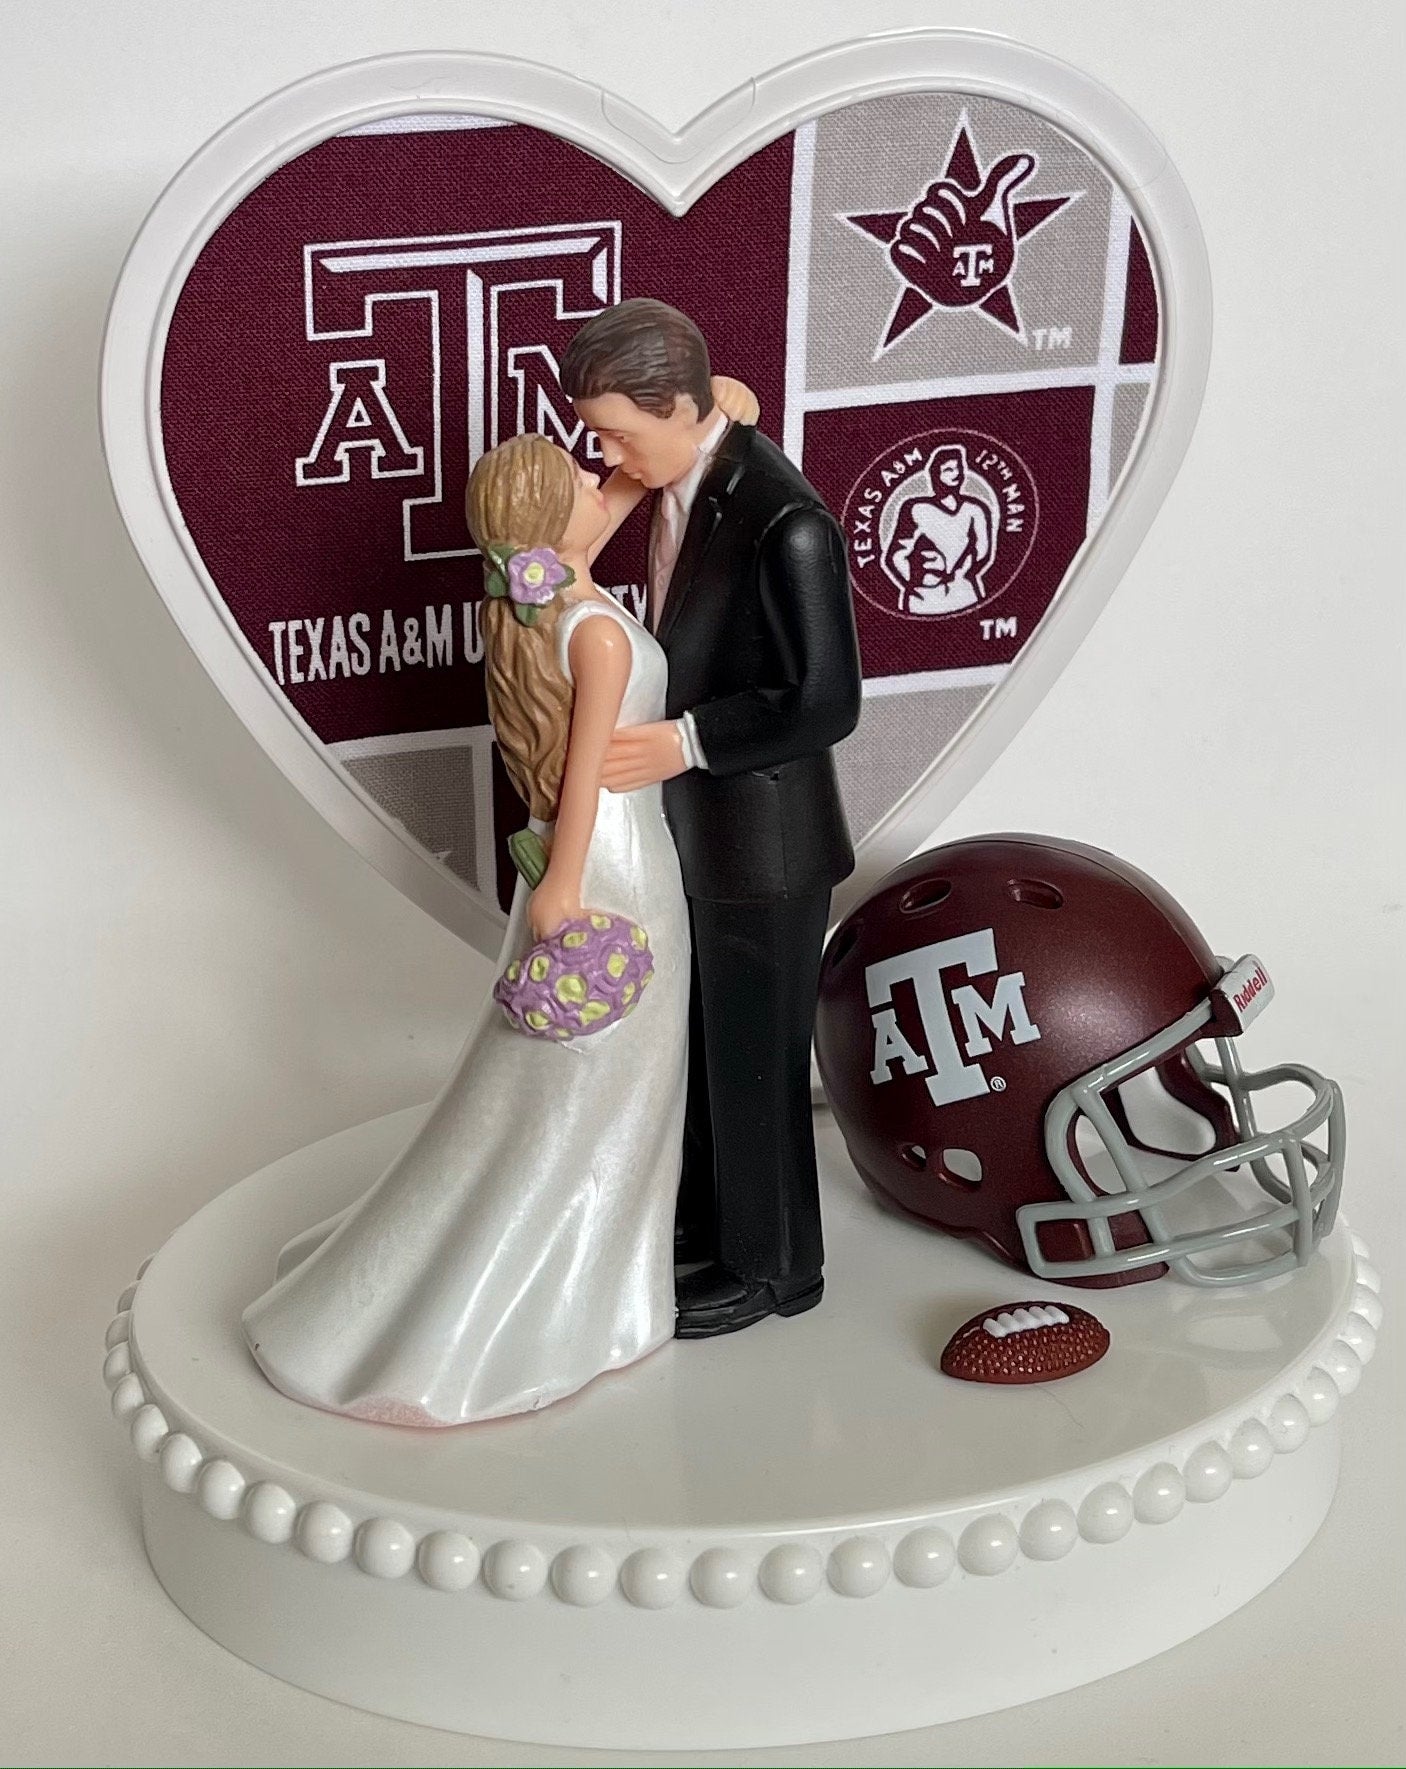 Wedding Cake Topper Texas A&M Aggies Football Themed Gorgeous Long-Haired Bride and Groom Unique Groom's Cake Top Reception Bridal Shower